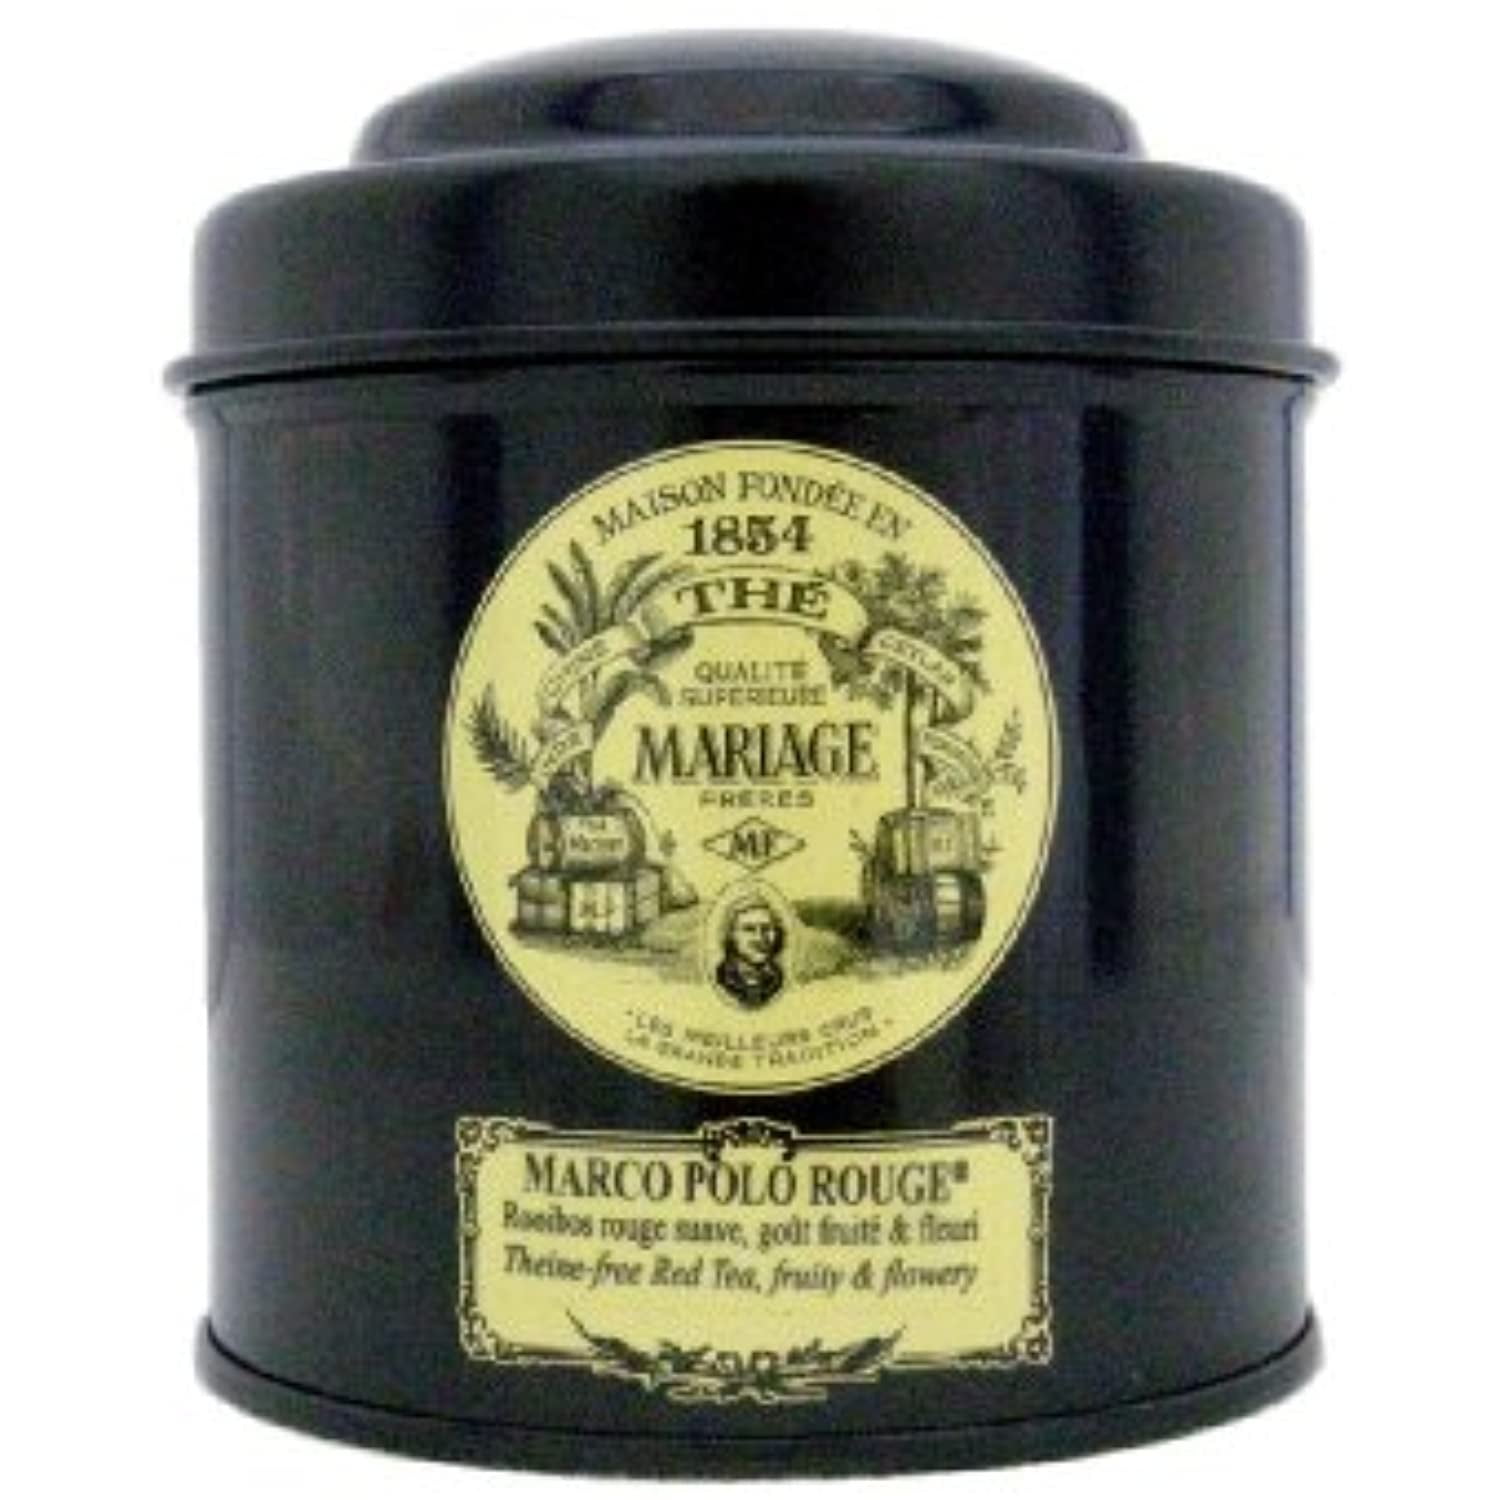 Mariage Freres Marco Polo Rouge 100G [Parallel Import Goods] - Walmart.com